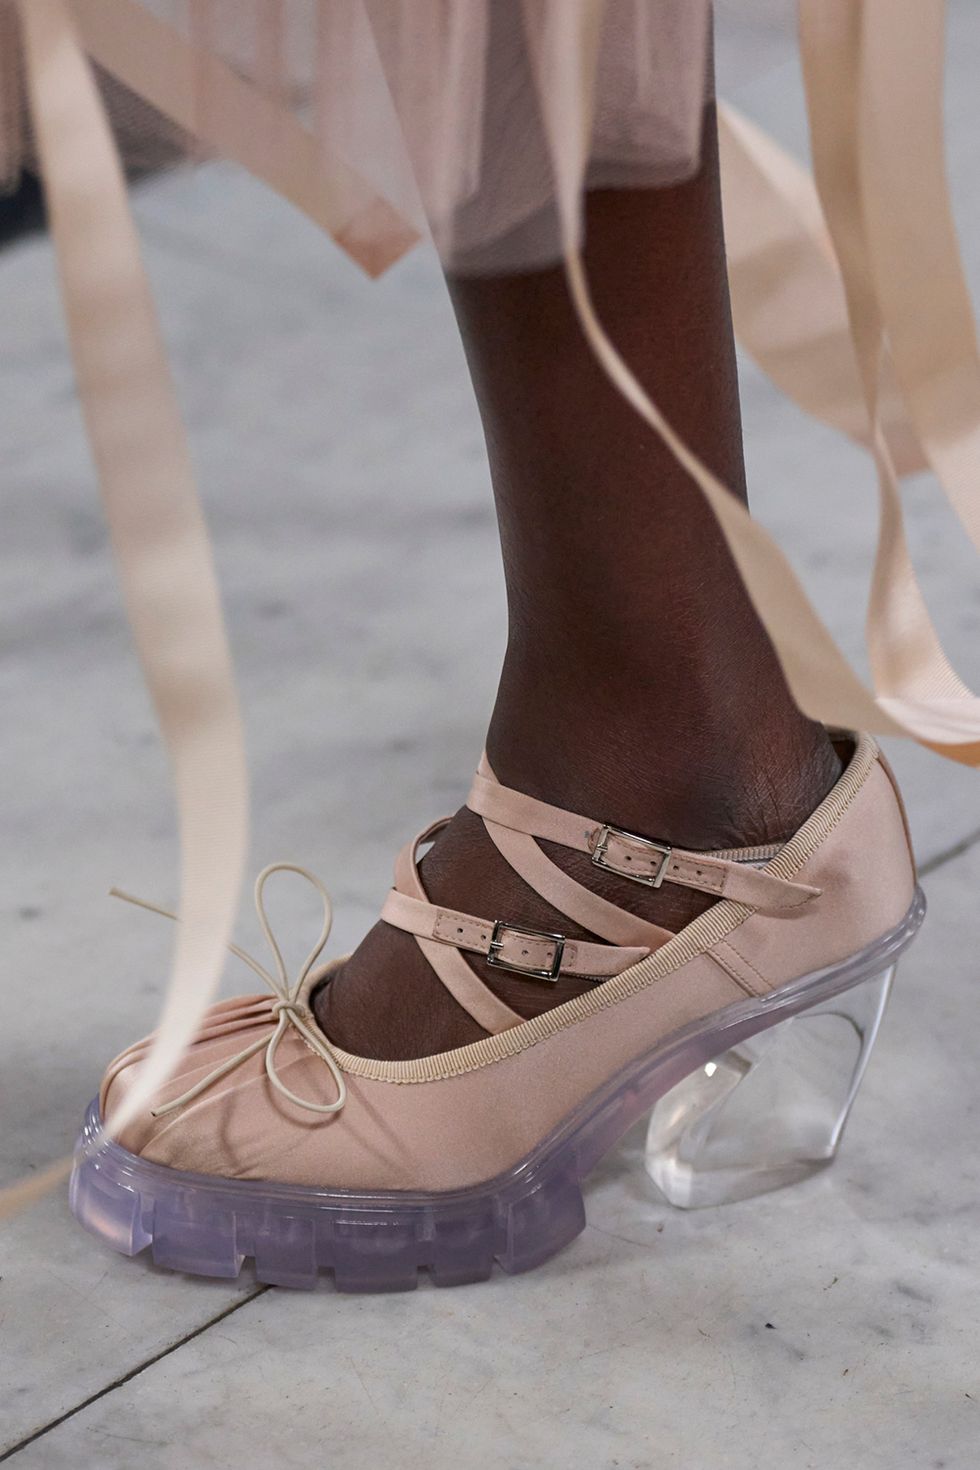 10 Best Spring 2023 Shoe Trends, from Girly to Grunge